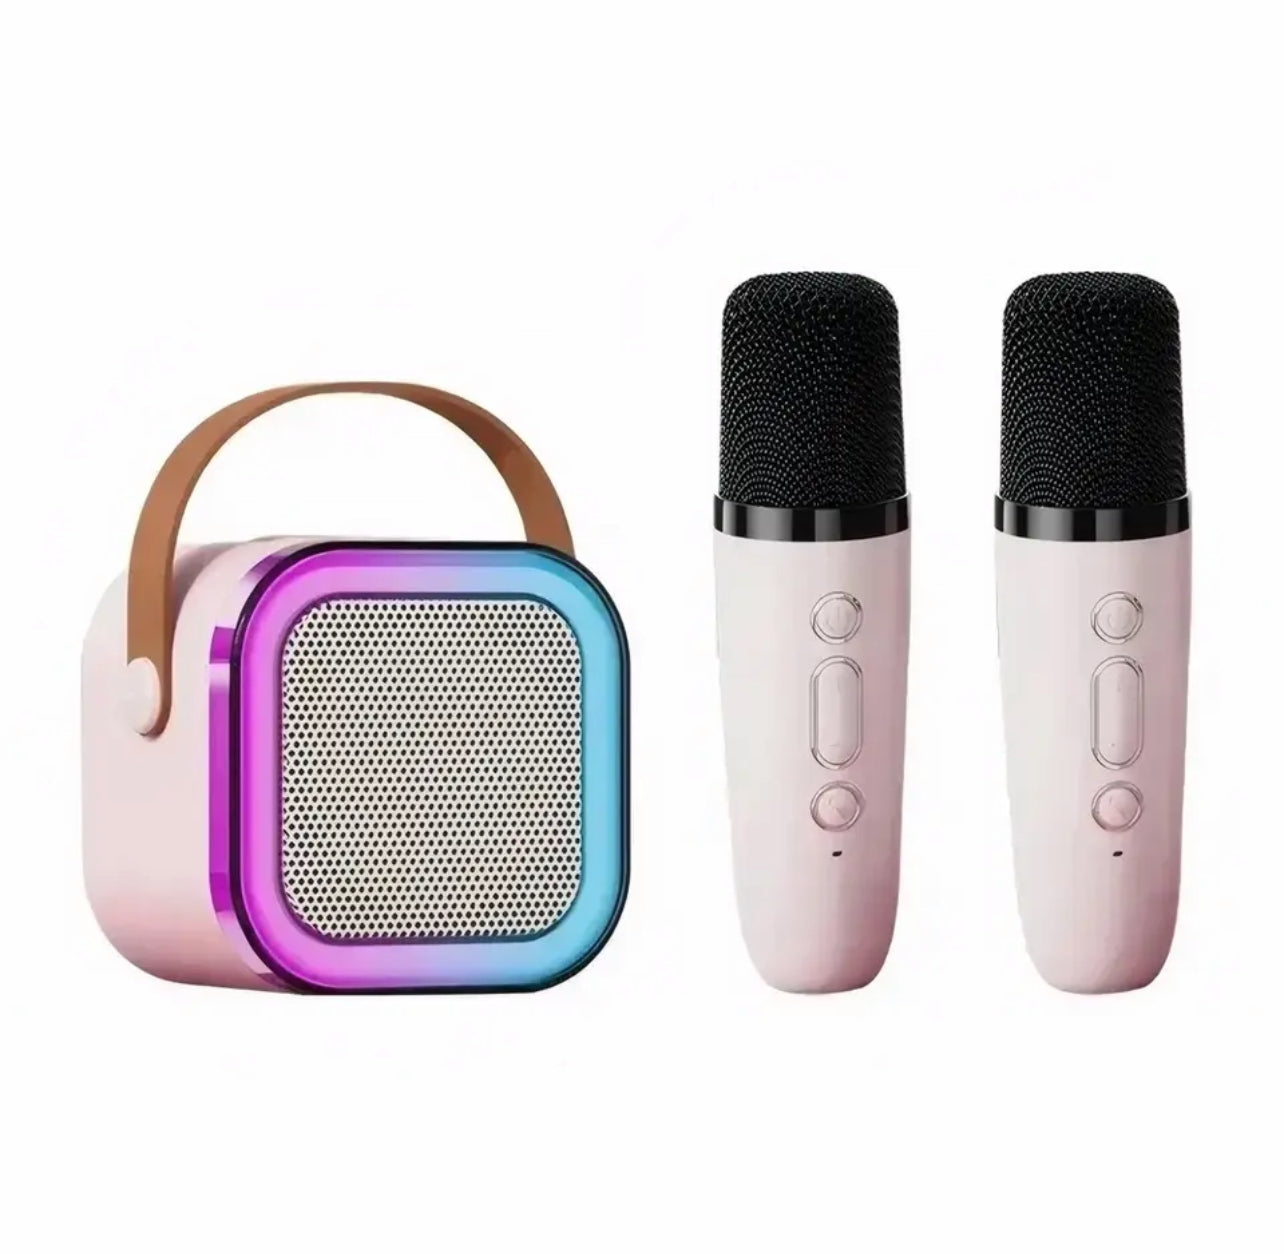 AED36.00 | K12 Karaoke Machine Portable Bluetooth 5.3 PA Speaker System with 1-2 Wireless Microphones Home Family Singing Children's Gifts
https://a.aliexpress.com/_oBWJgGA